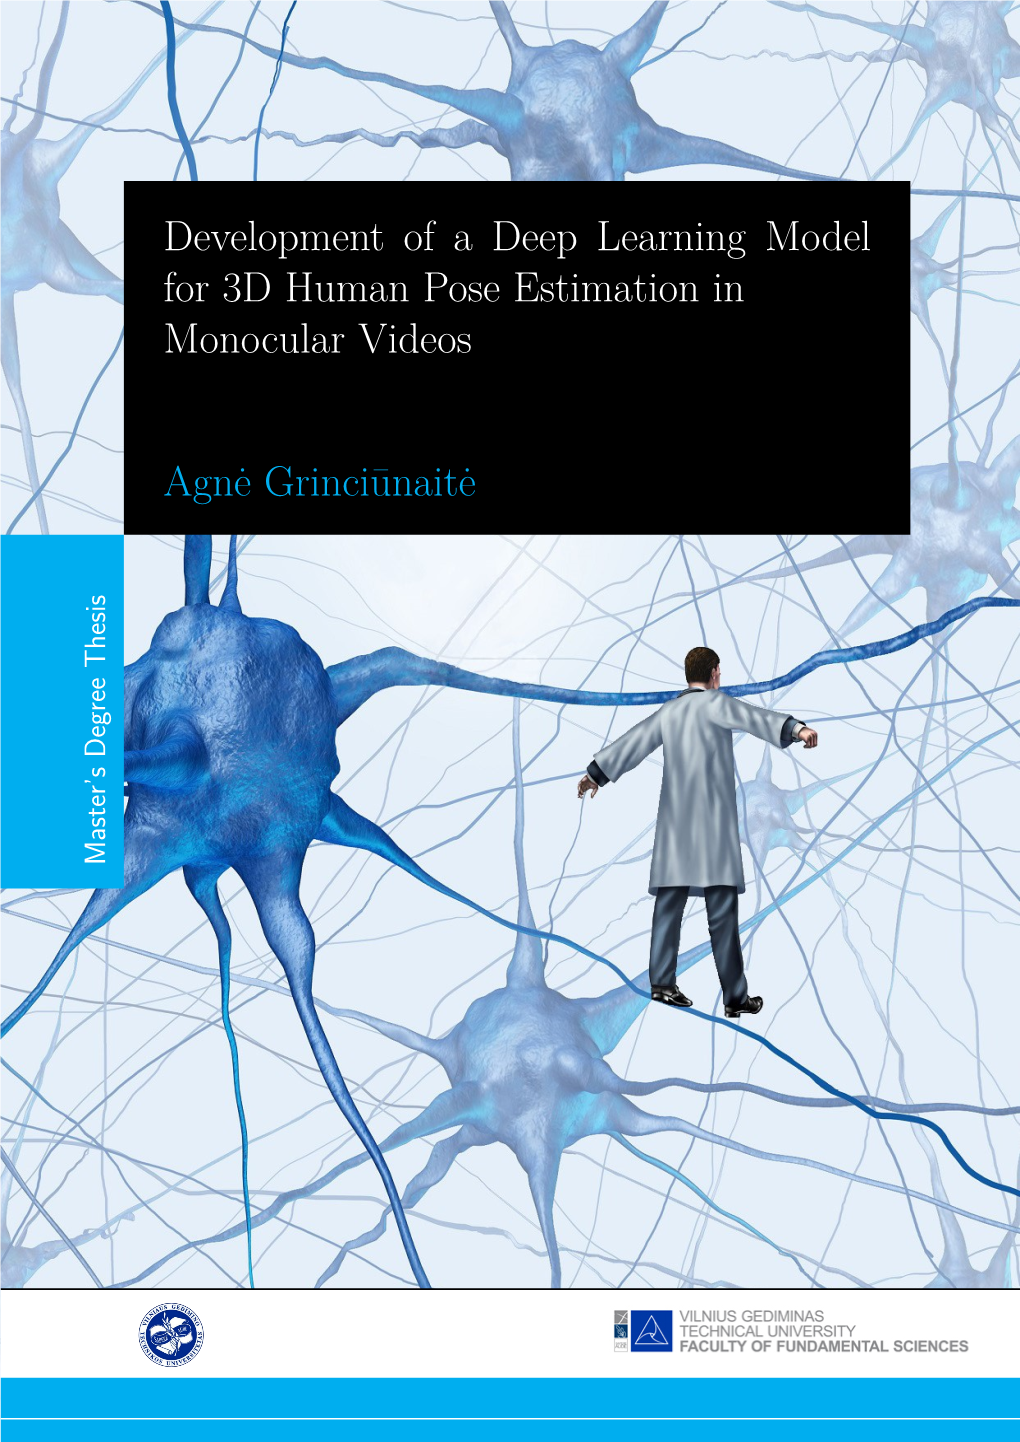 Masters Thesis: Development of a Deep Learning Model for 3D Human Pose Estimation in Monocular Videos